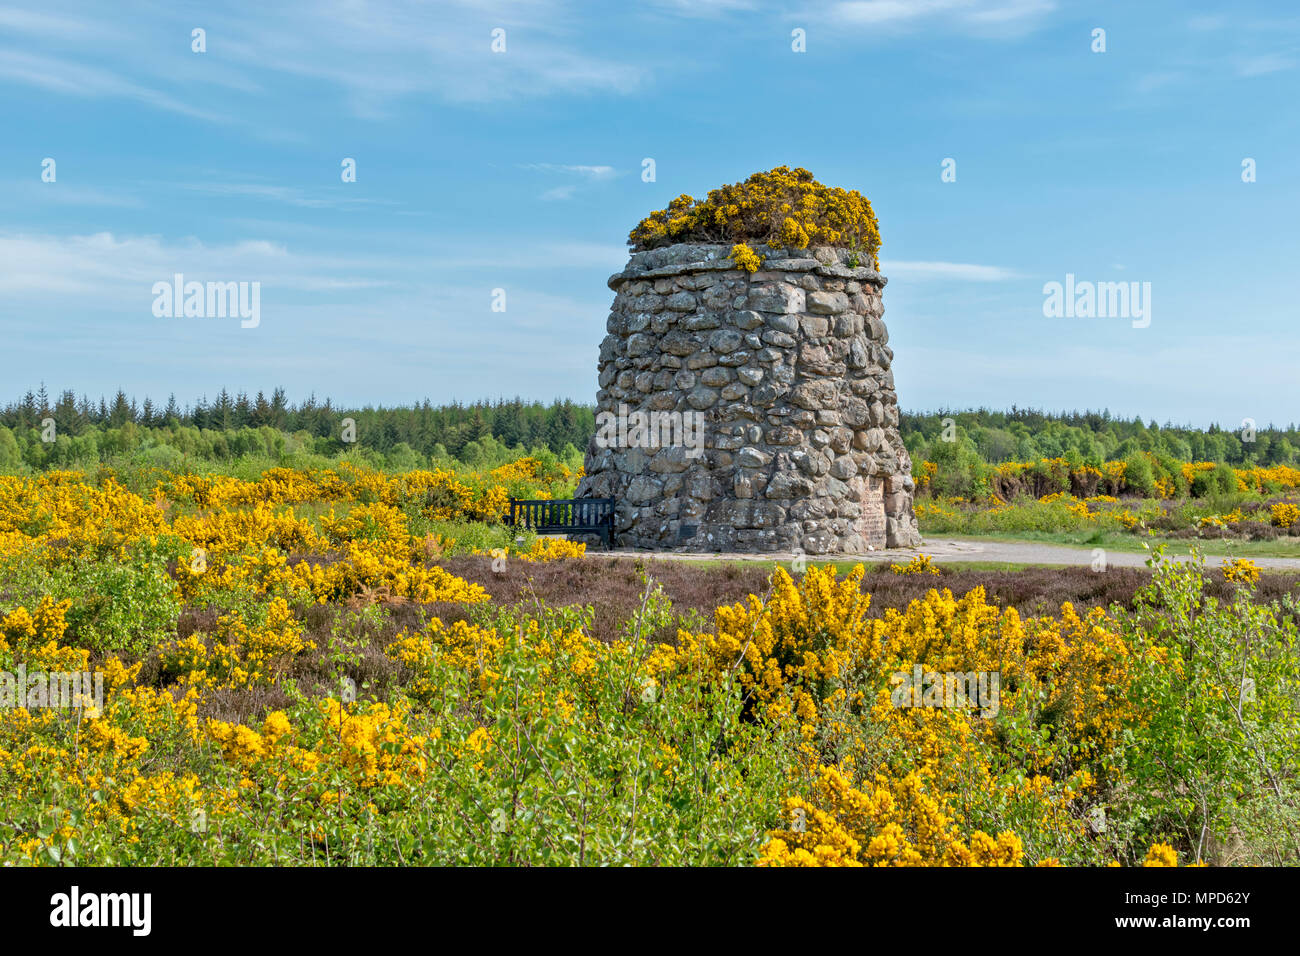 CULLODEN BATTLEFIELD OR MOOR INVERNESS SCOTLAND  THE MEMORIAL CAIRN SURROUNDED BY YELLOW GORSE AND YOUNG BIRCH TREES IN SPRING Stock Photo